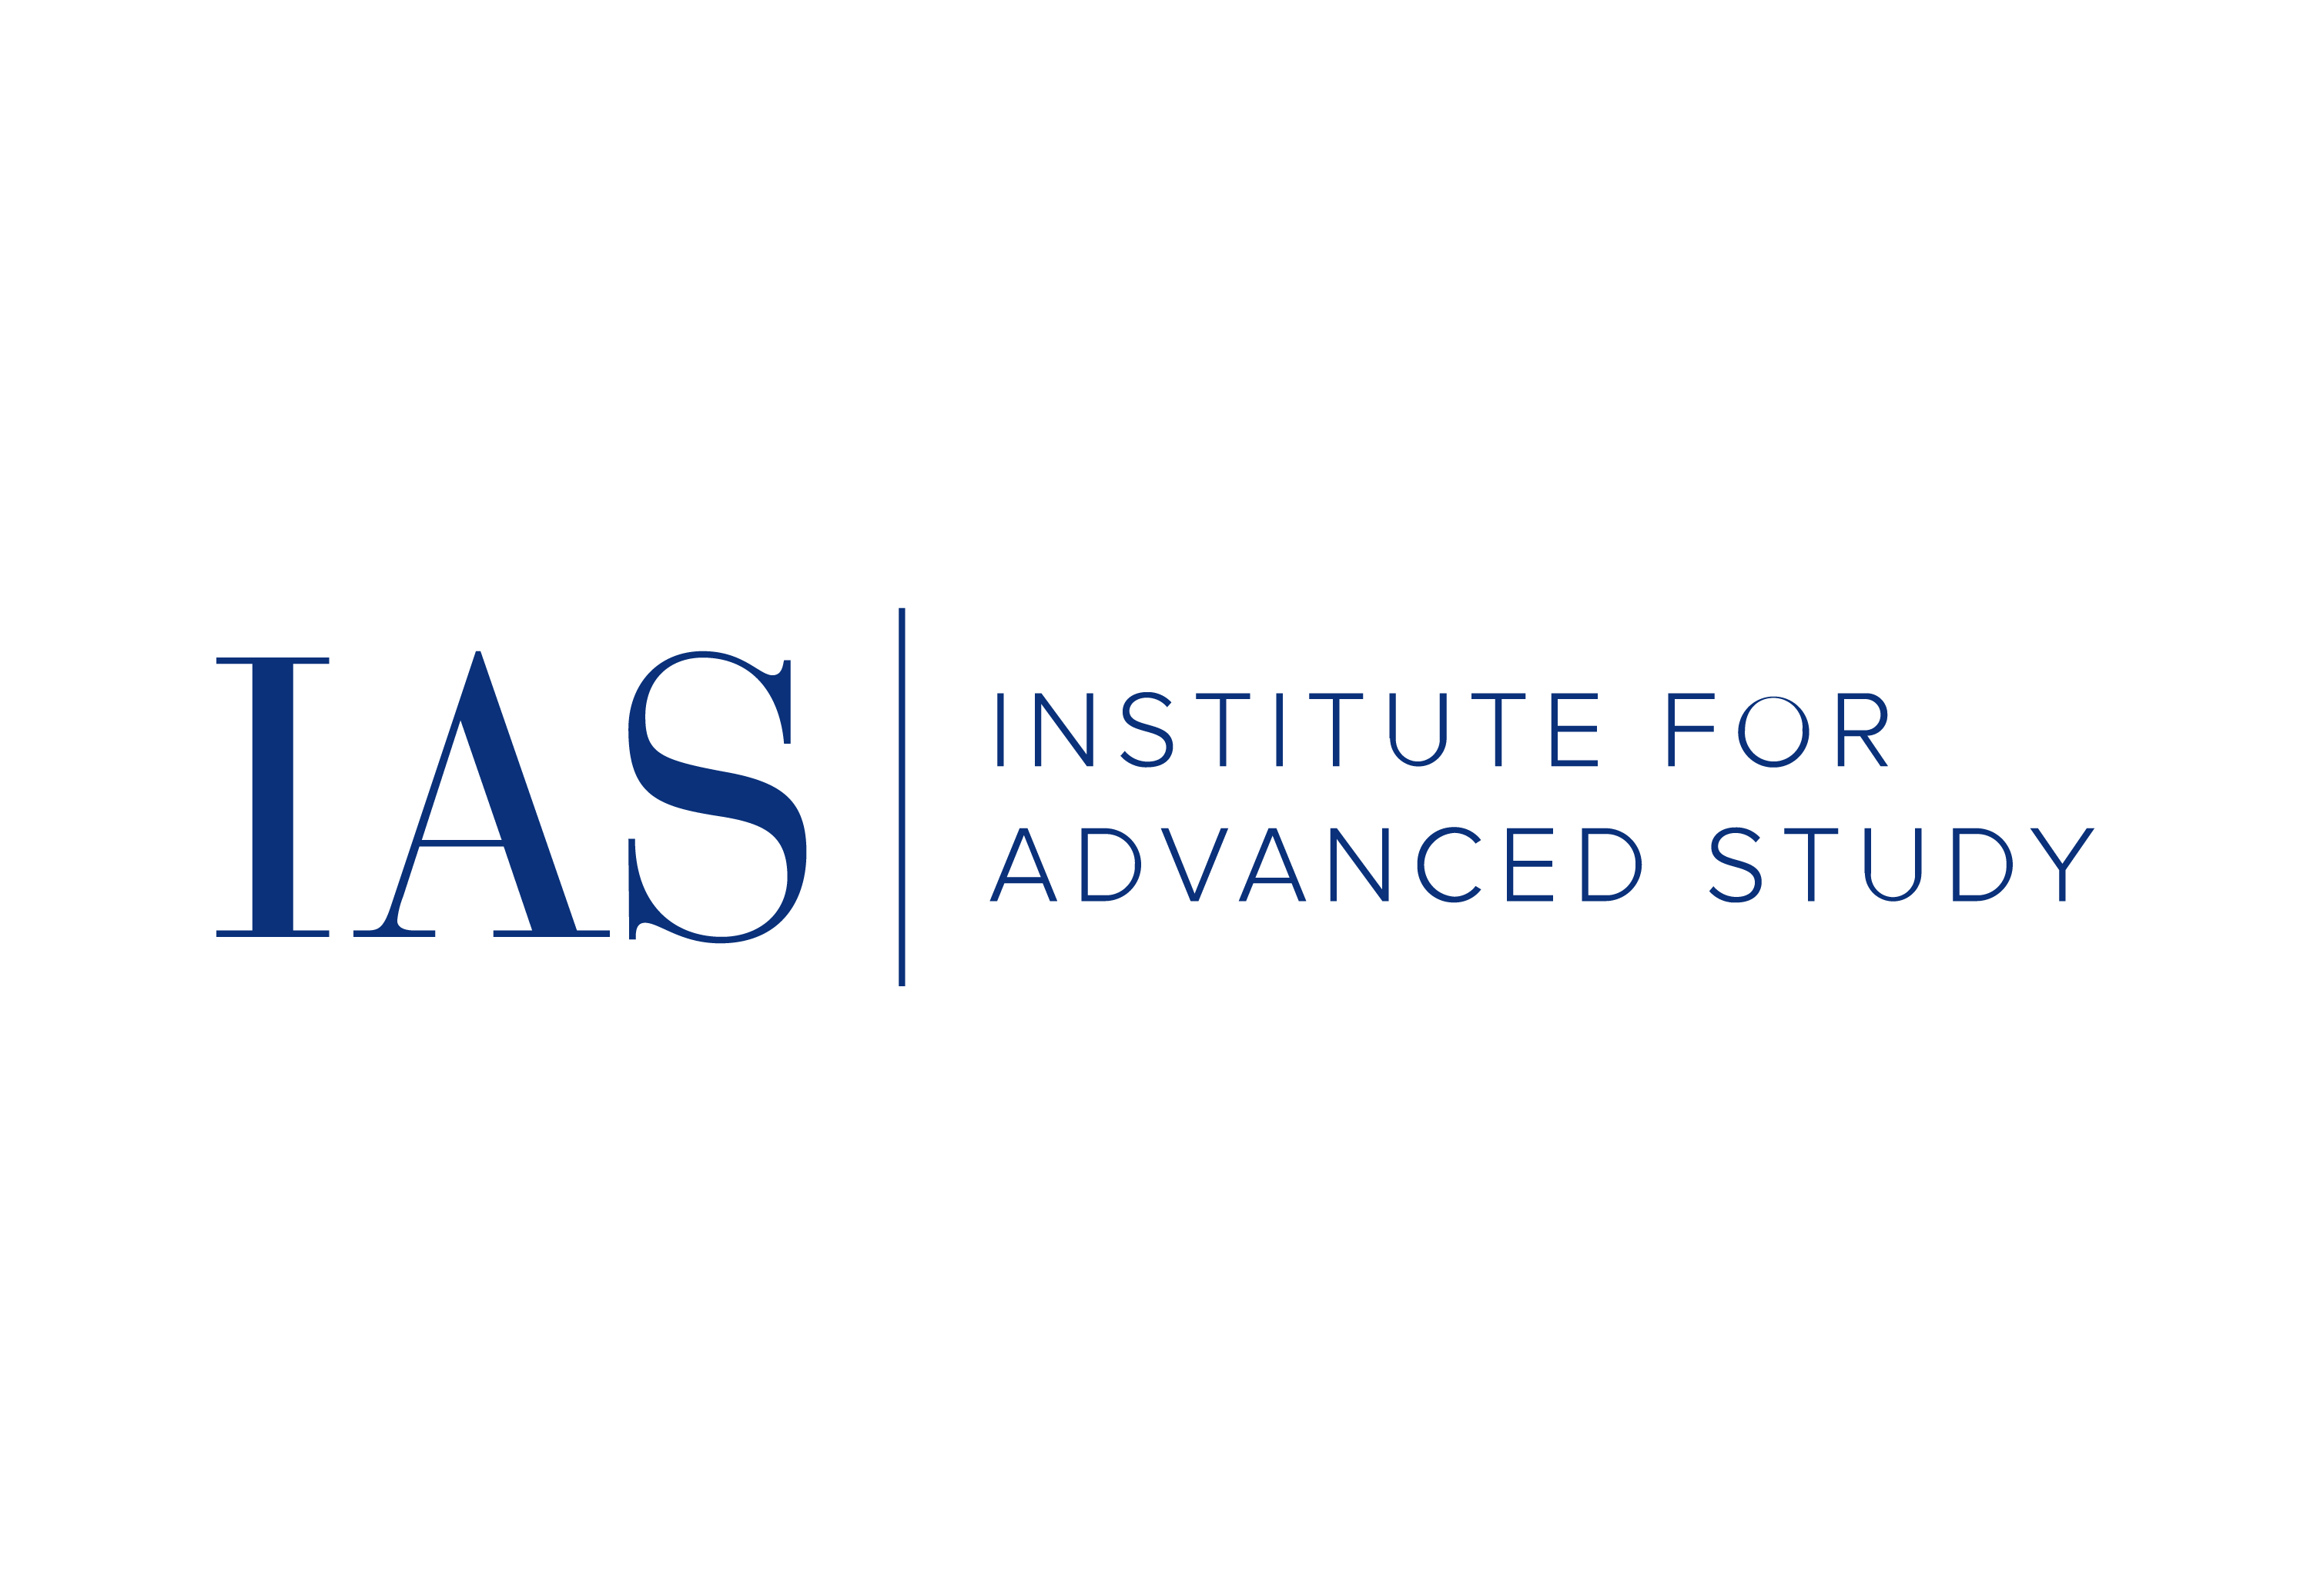 Institute for Advanced Study IAS